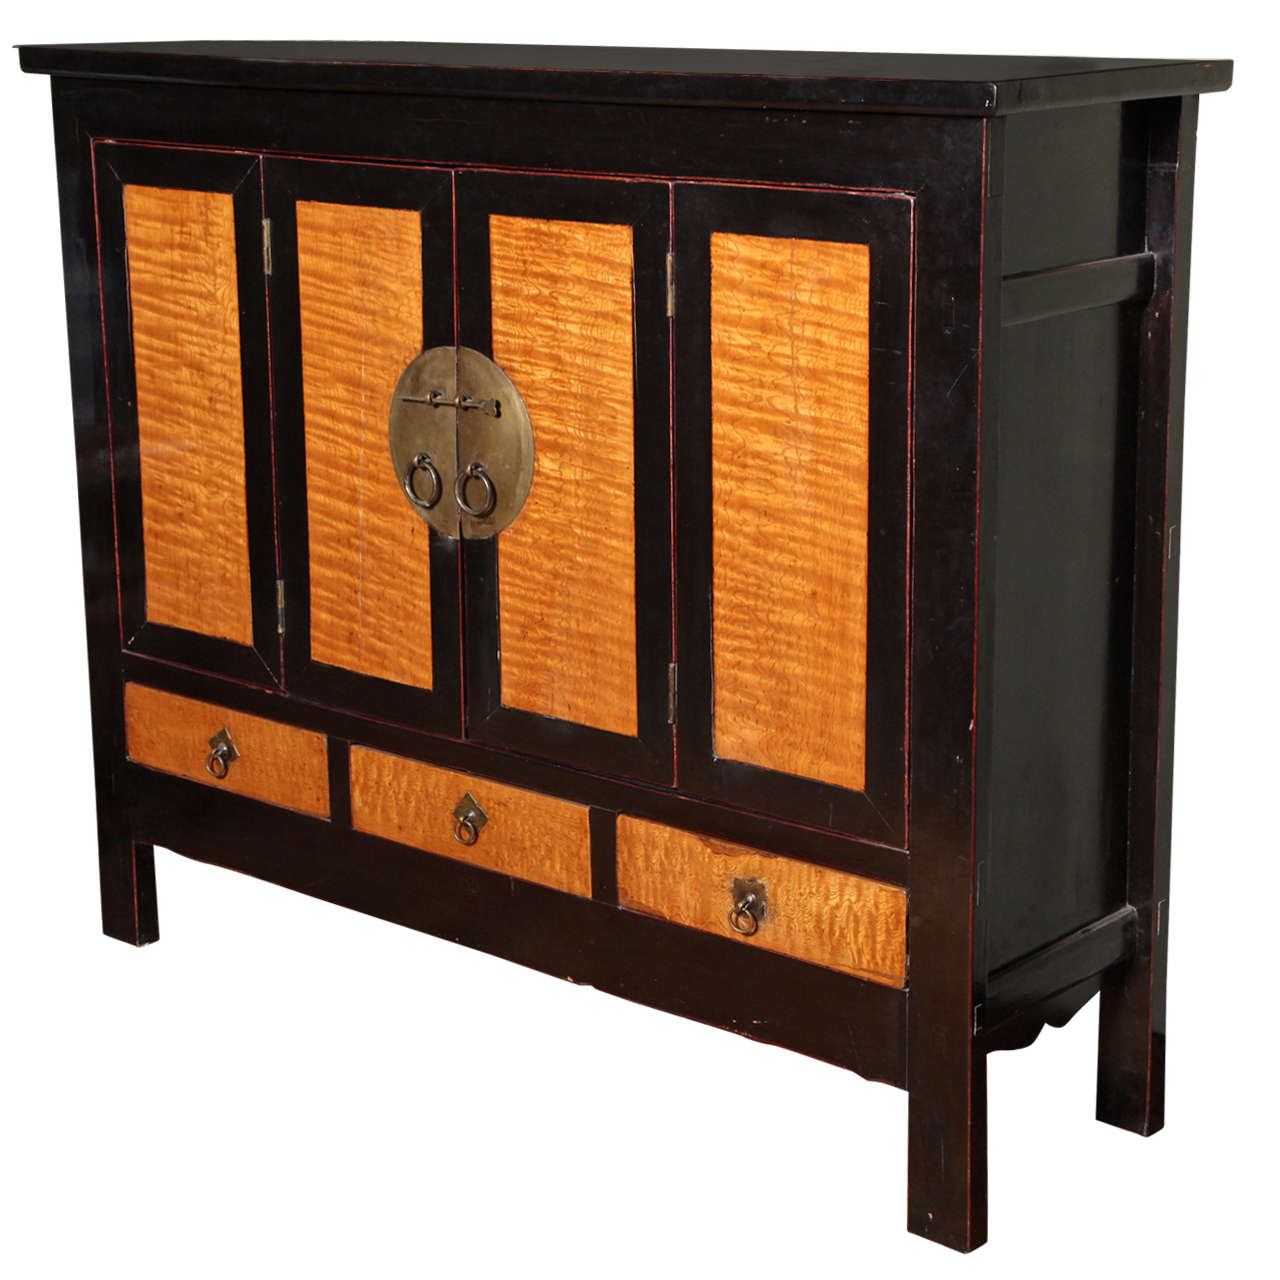 Late Qing Dynasty Black Lacquer and Burl Wood Cabinet with Accordion Doors